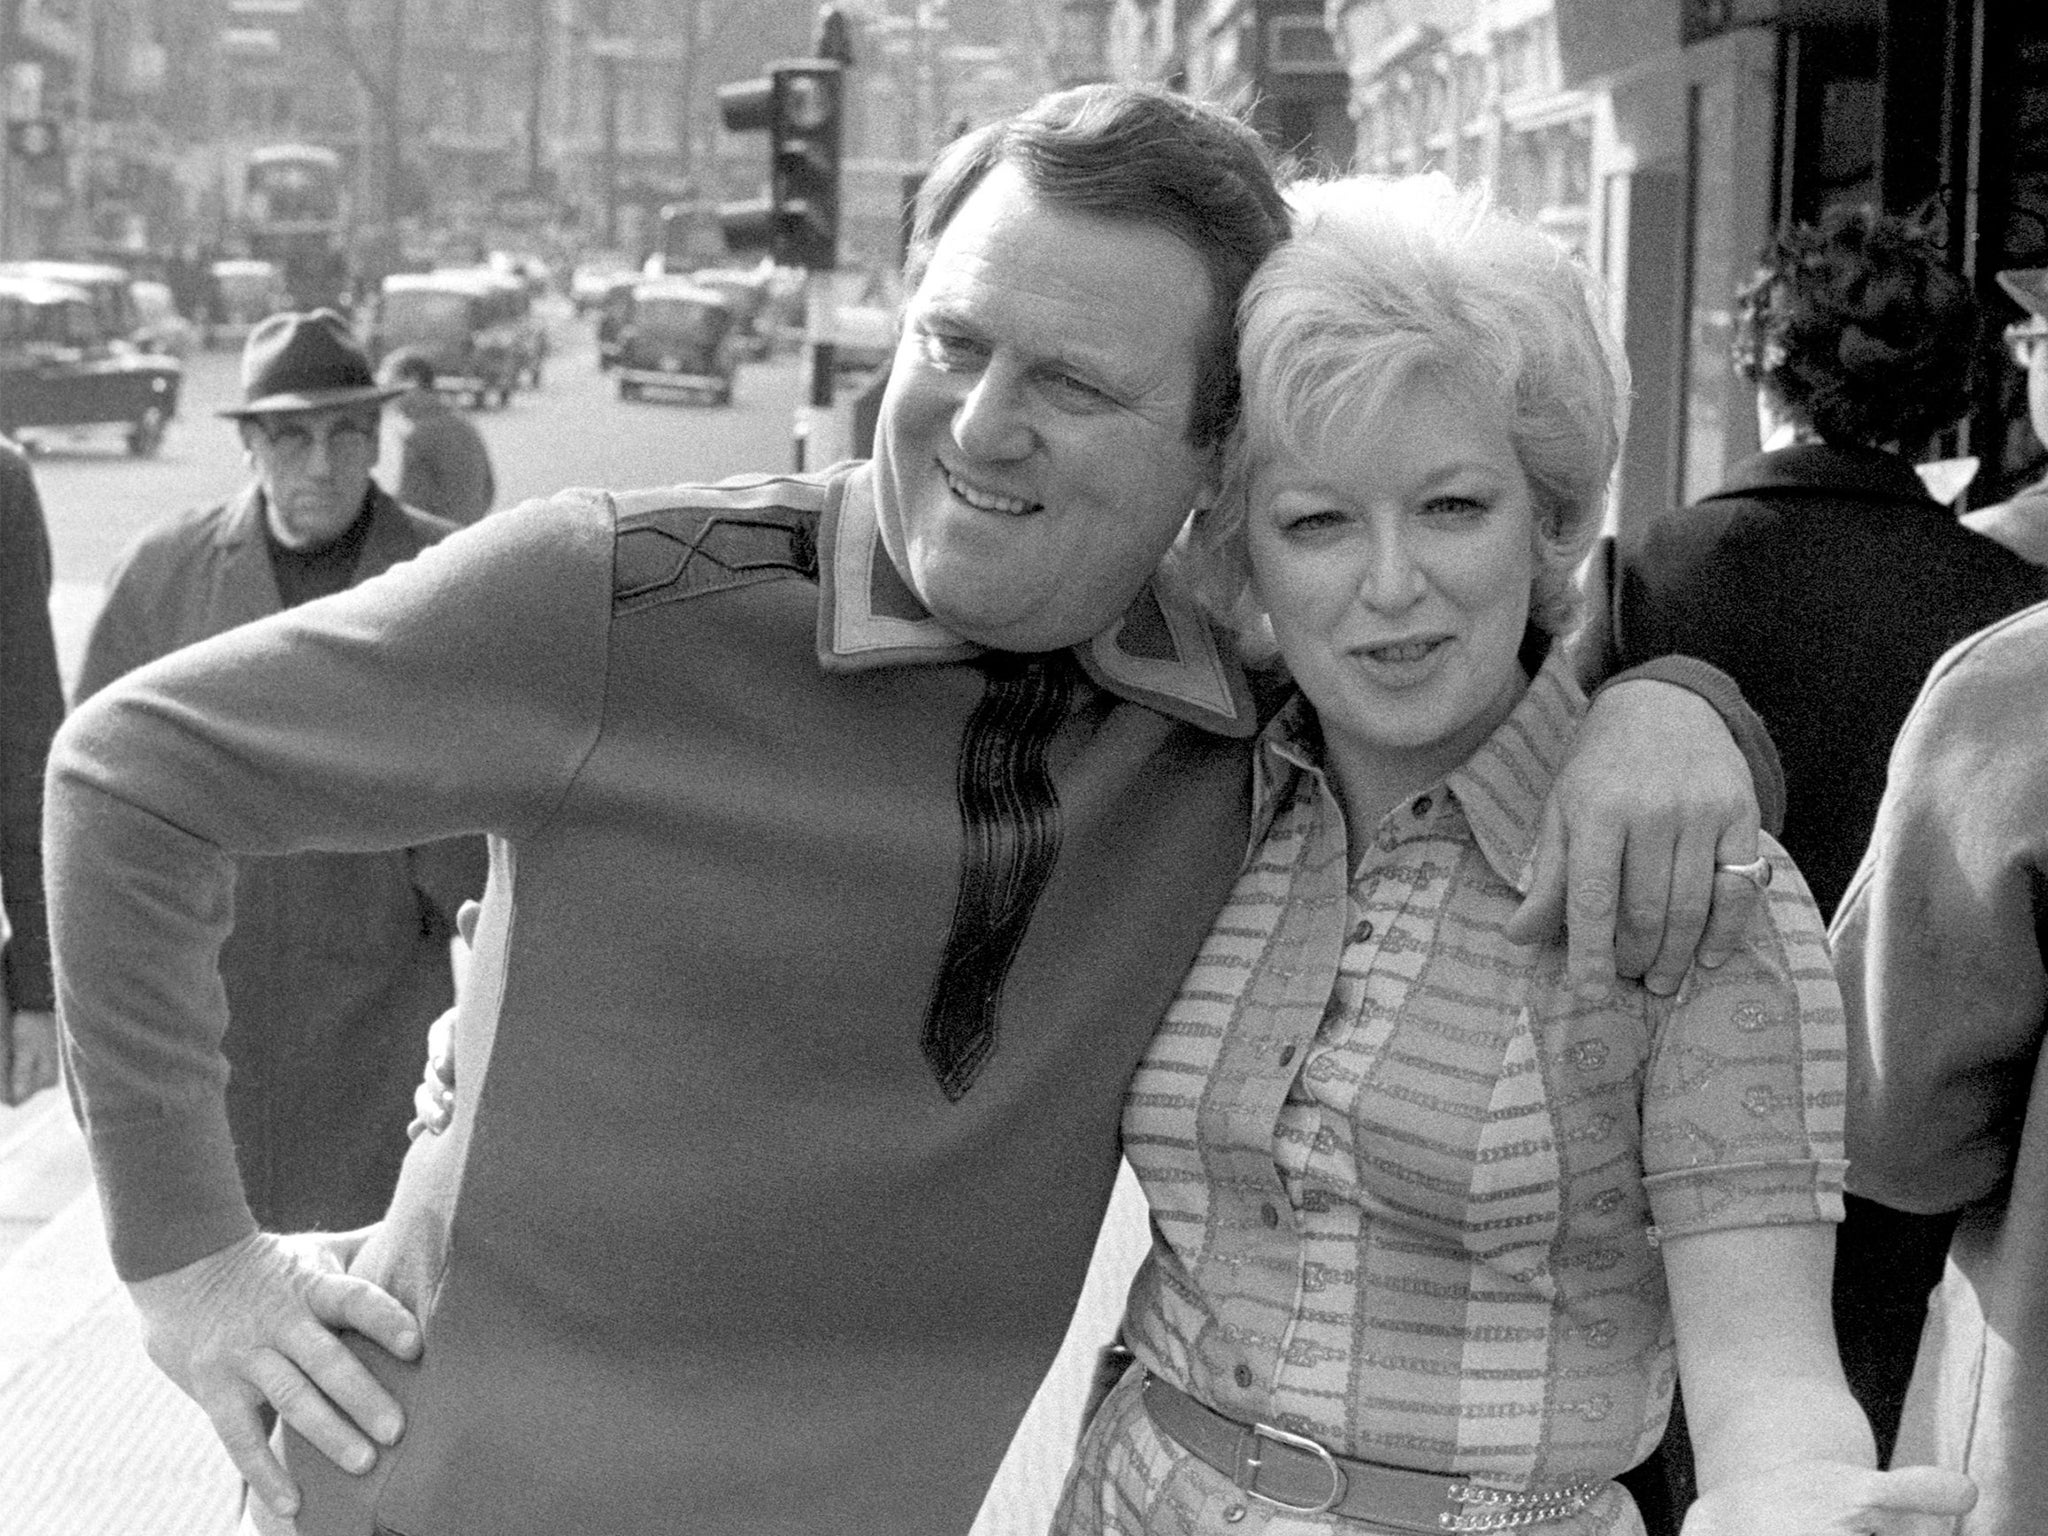 Co-stars Terry Scott and June Whitfield in 1976